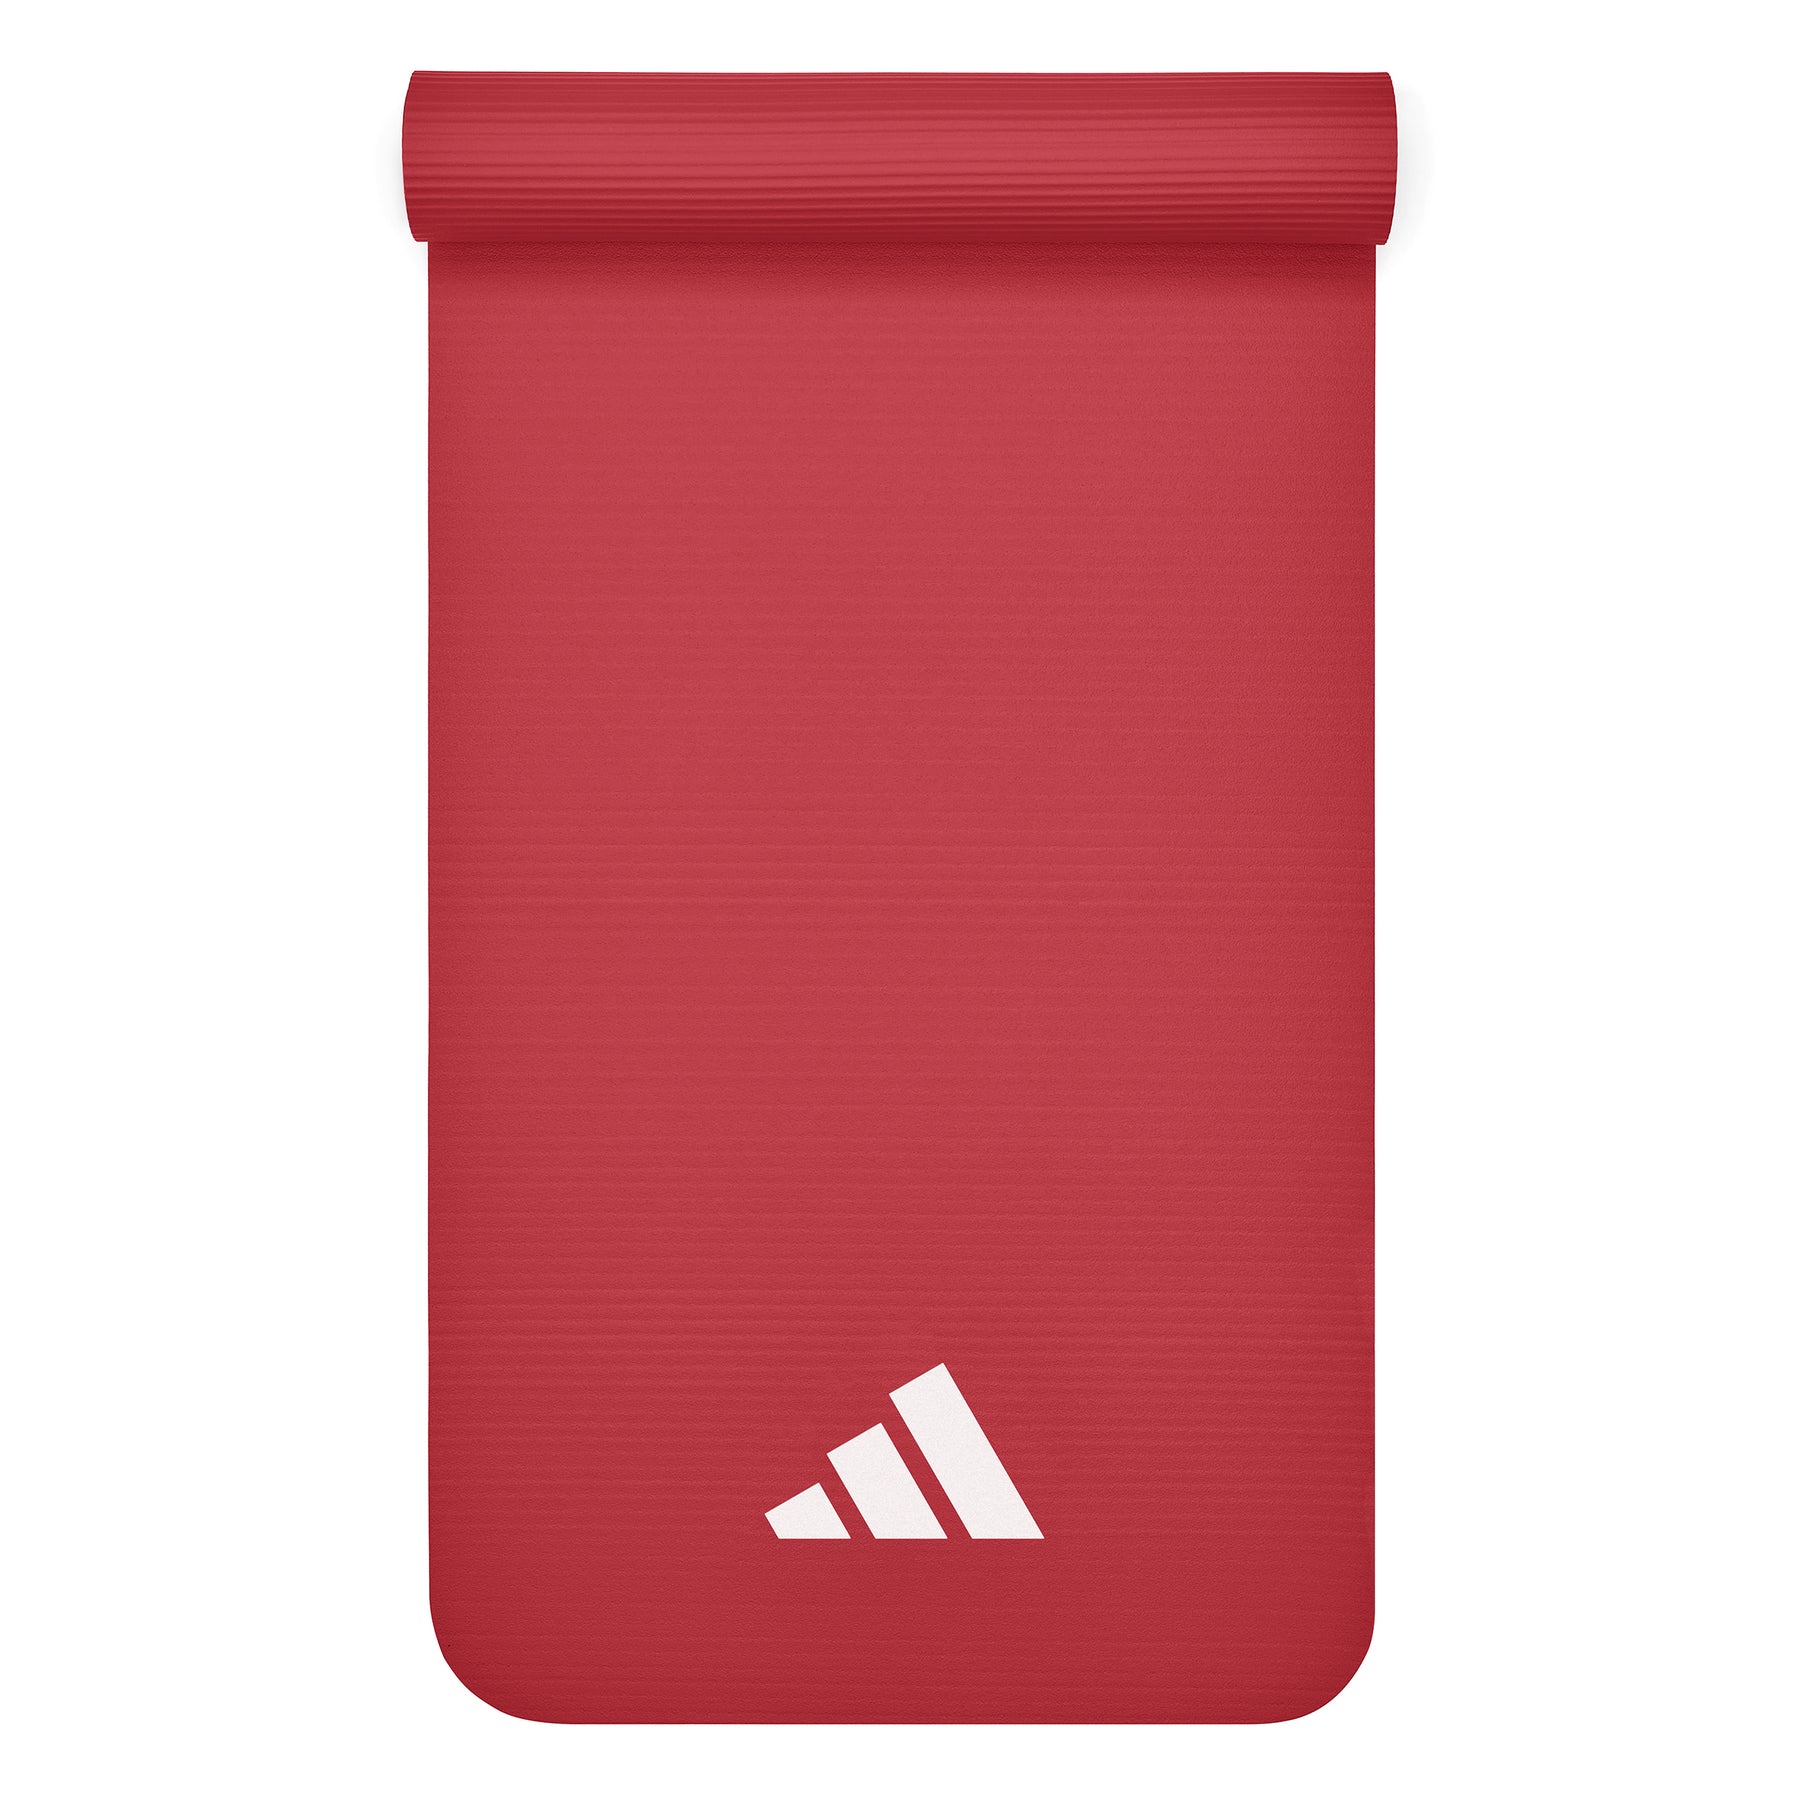 Adidas Fitness Mat 7mm Red